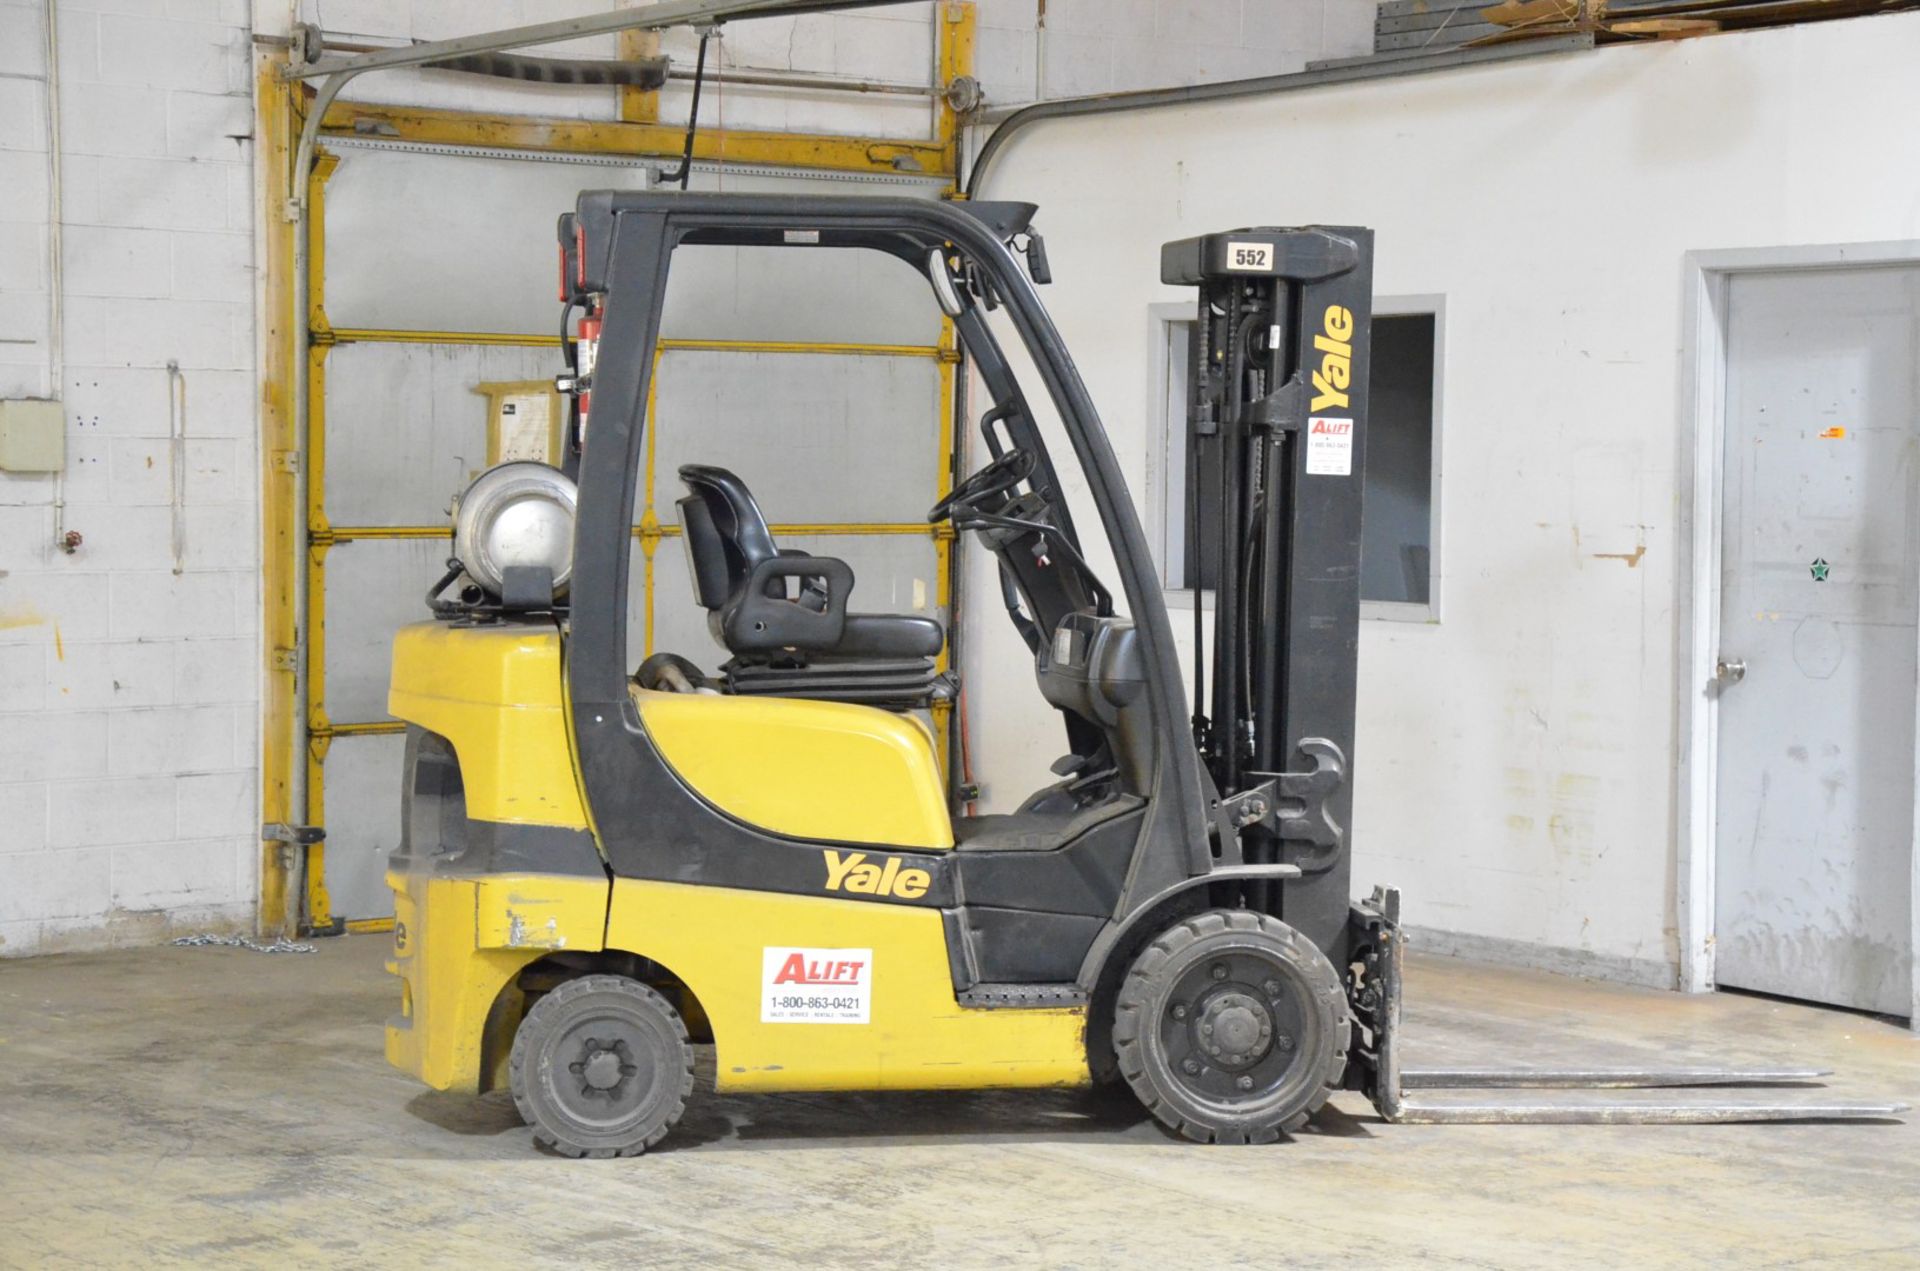 YALE (2014) GLC050VXNVSE083 4,800 LB. CAPACITY LPG FORKLIFT WITH 189" MAX. LIFT HEIGHT, 3-STAGE - Image 6 of 8